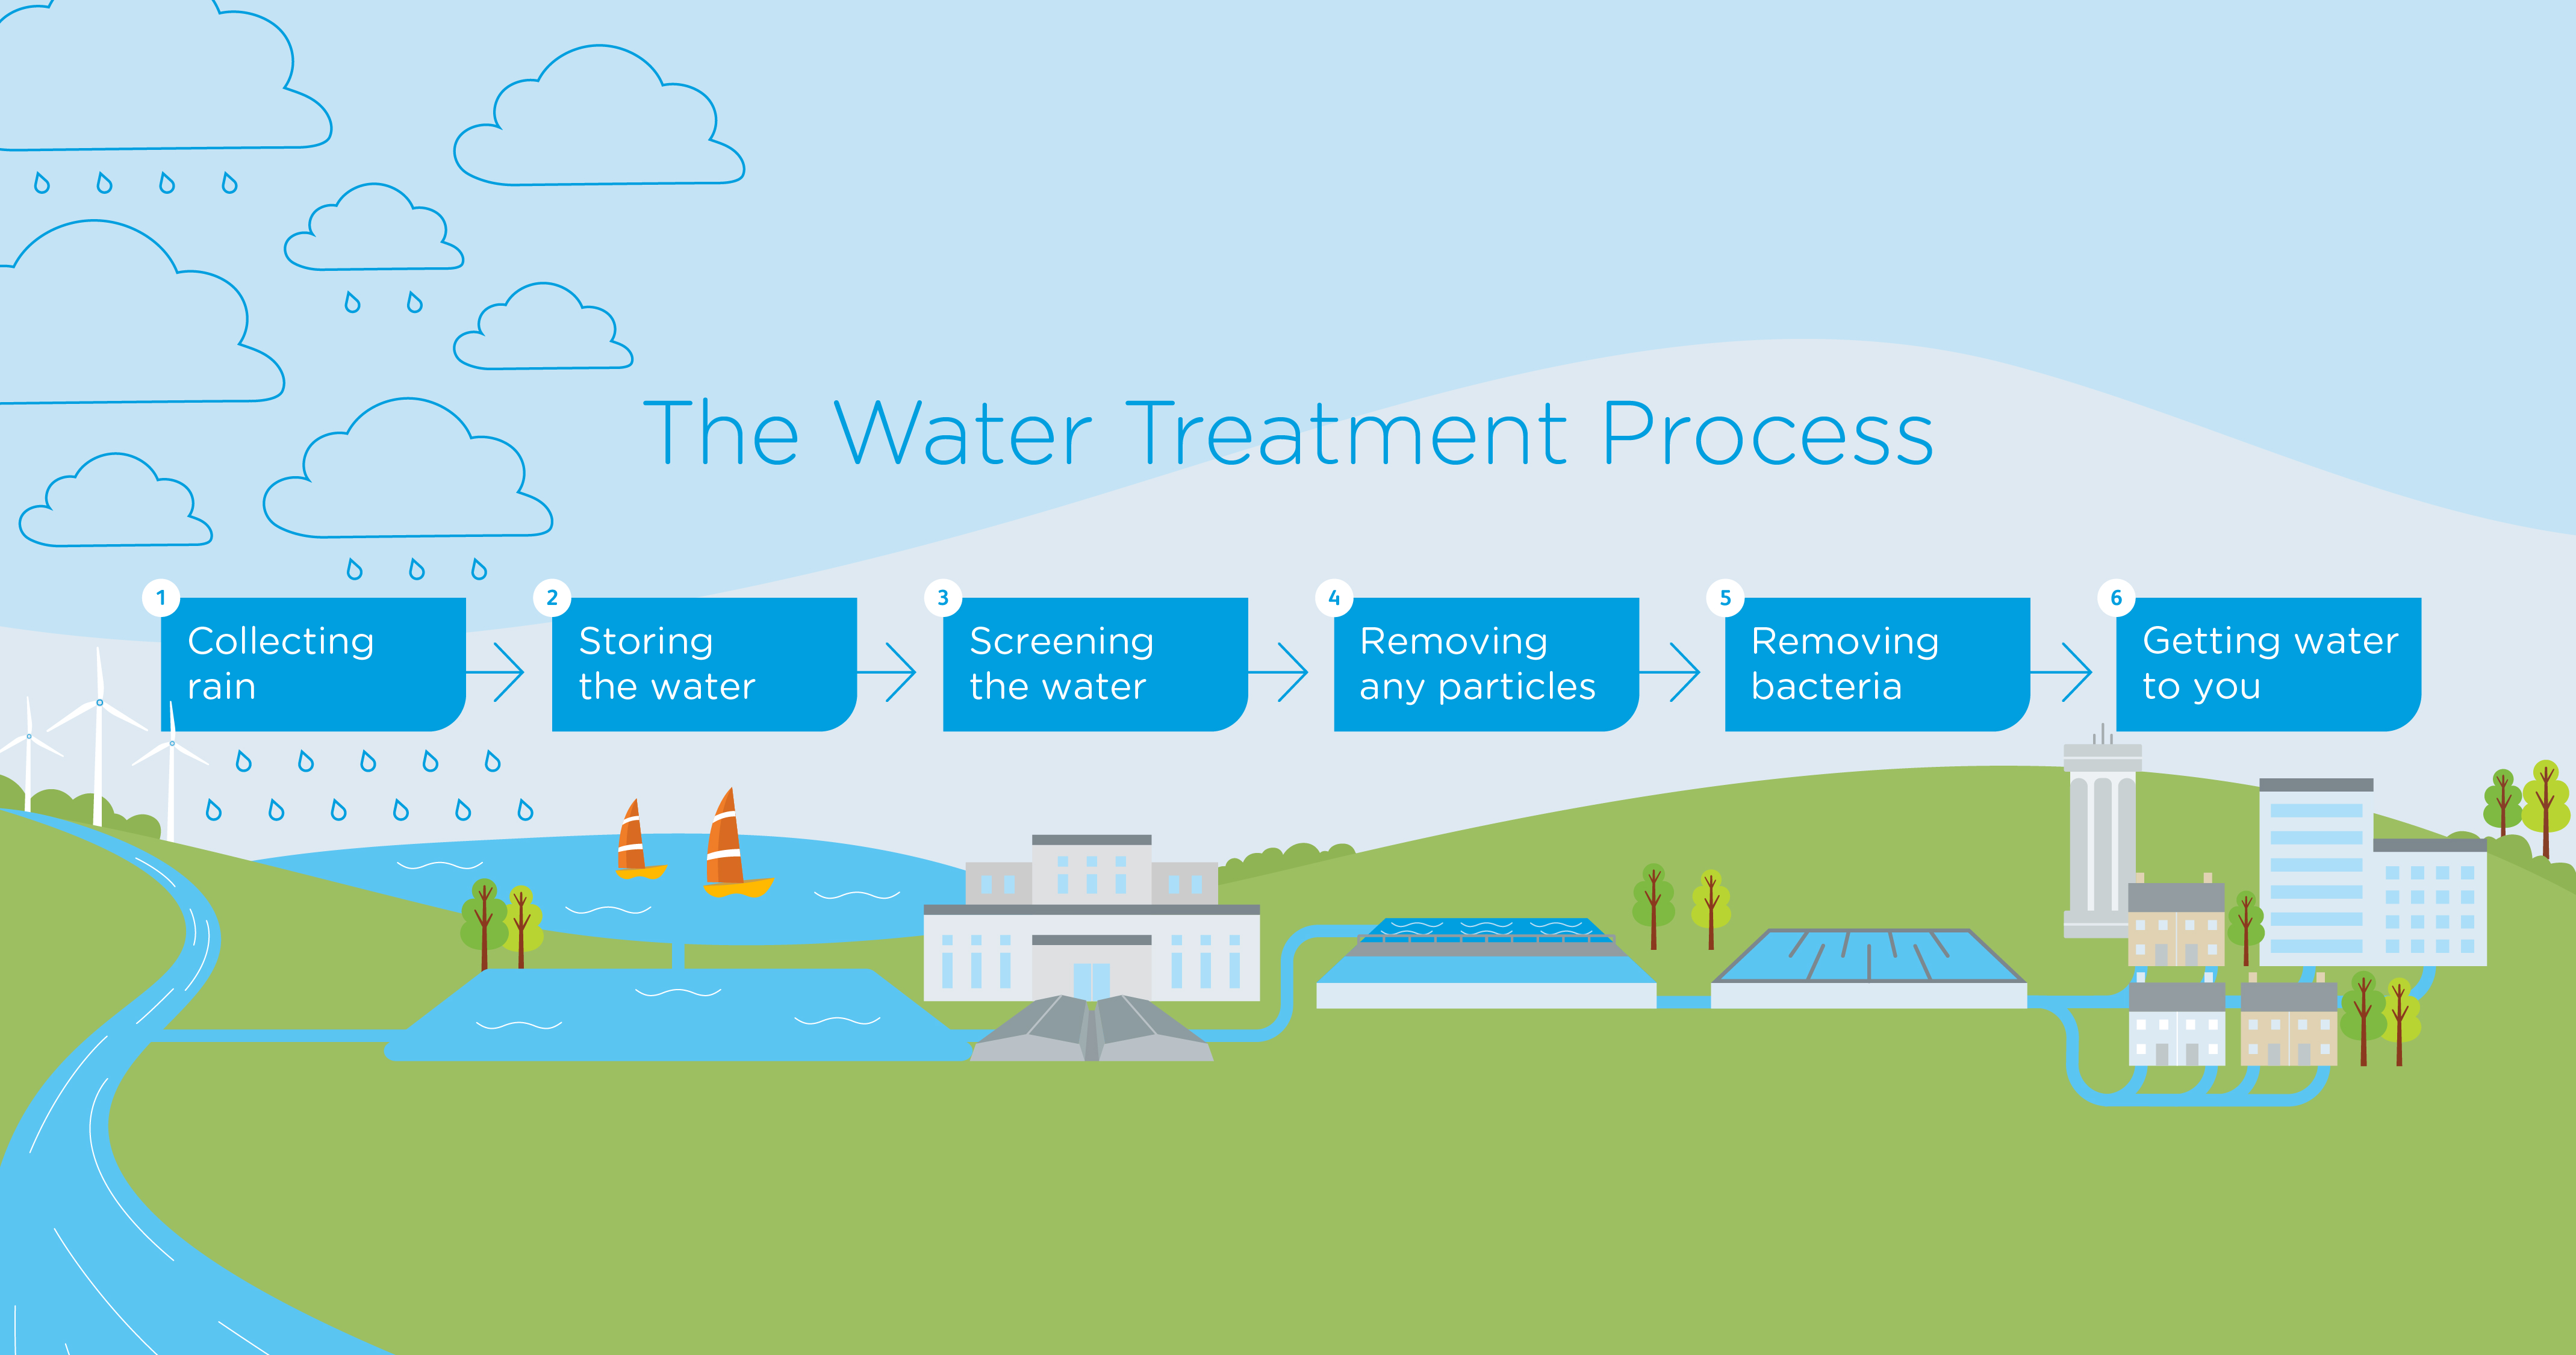 The water treatment process diagram